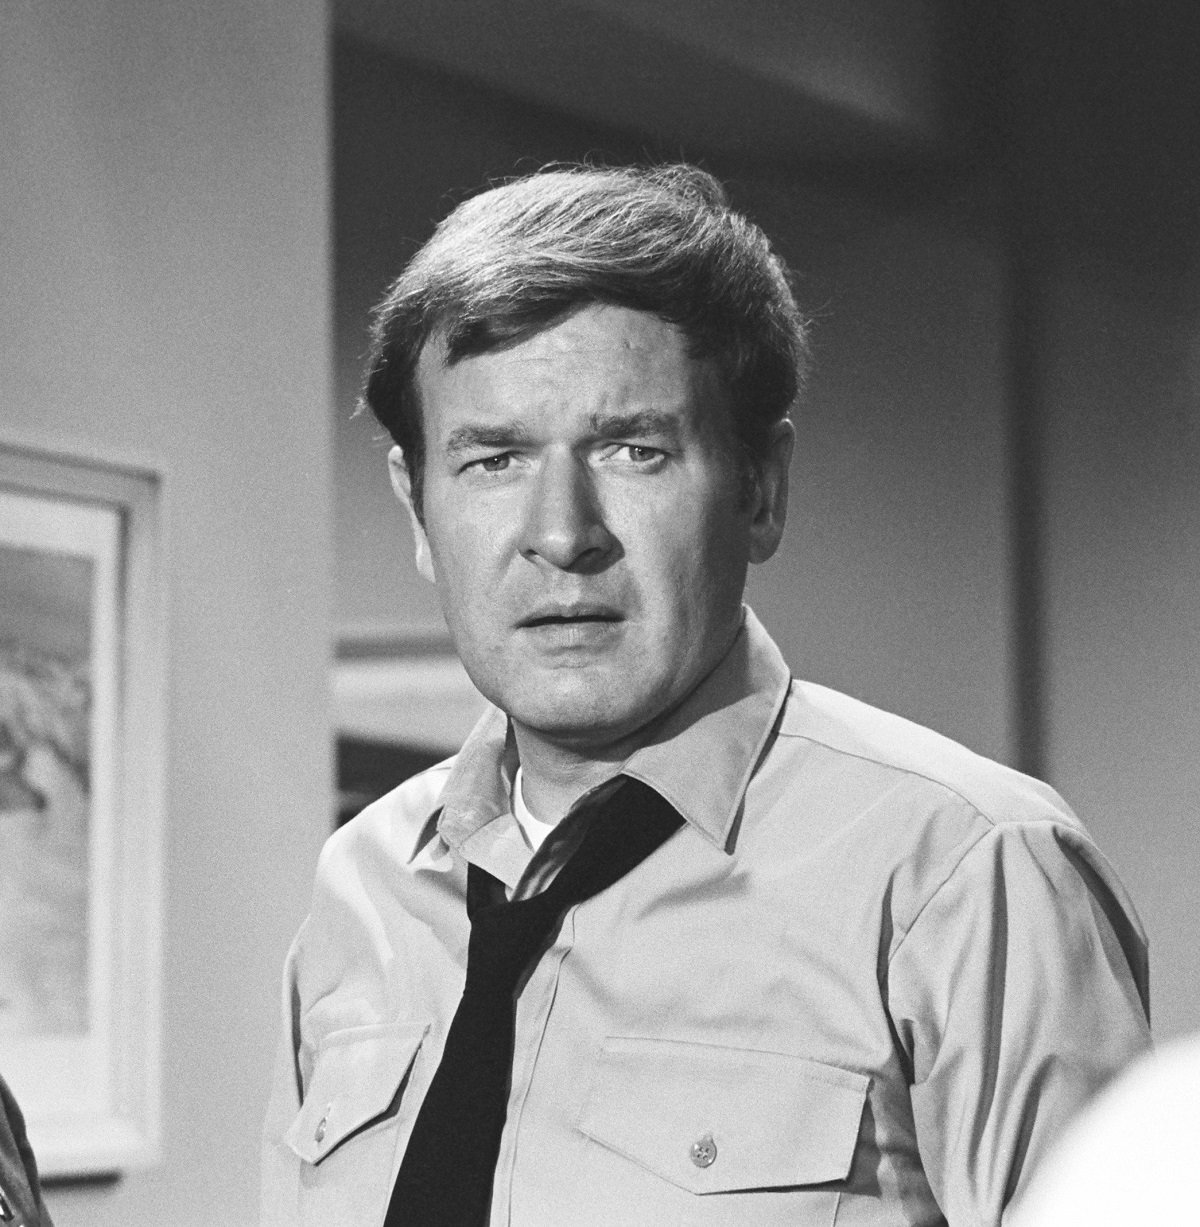 Bill Daily as Maj. Roger Healey on the set of 'I Dream of Jeannie'